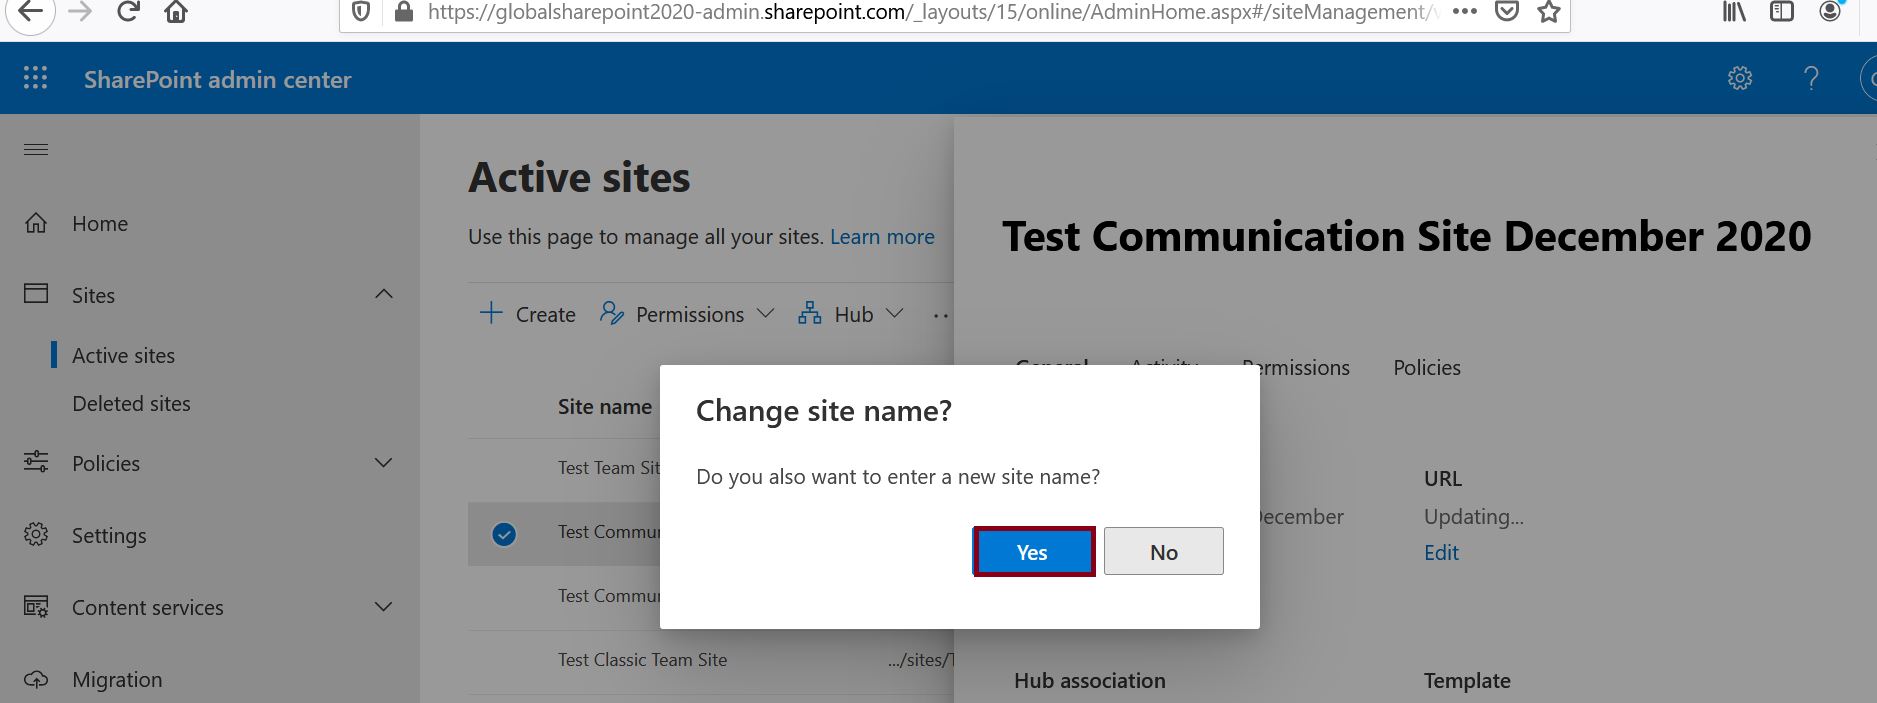 Change site URL in SharePoint online, change site name - Do you also want to enter a new site name?